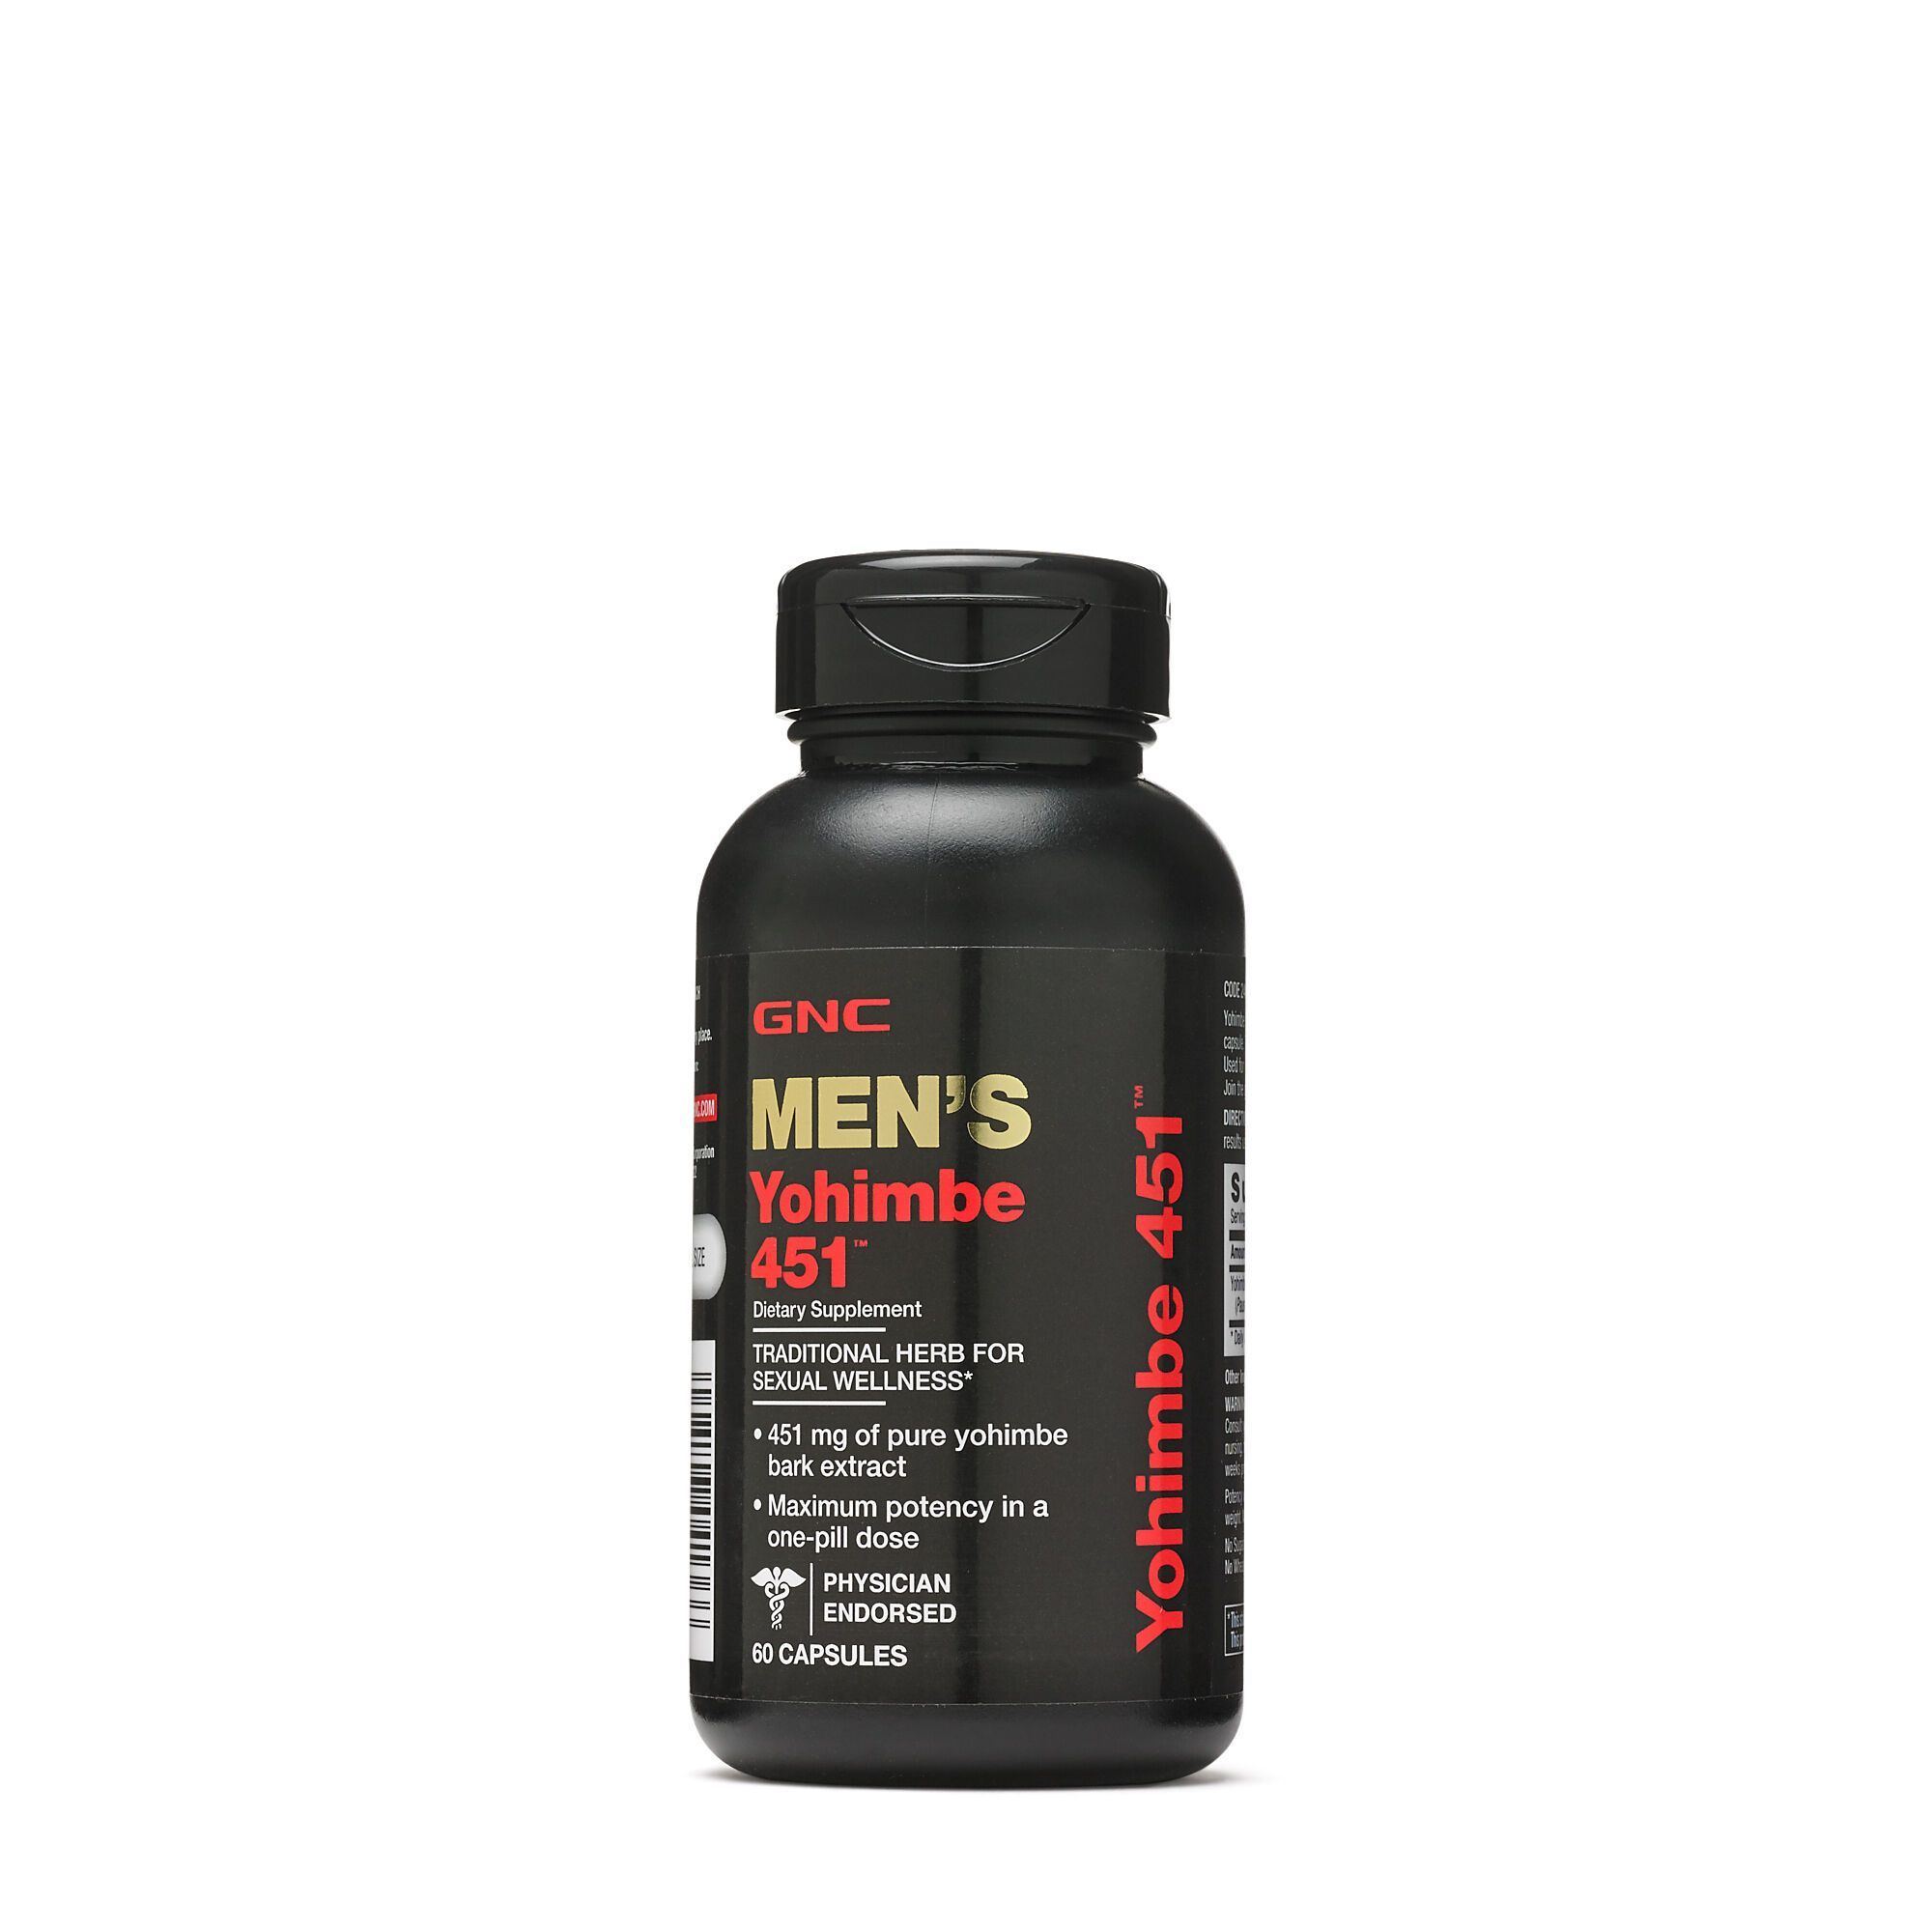 Whiskey reccomend Yohimbine over-the-counter for sexual dysfunction